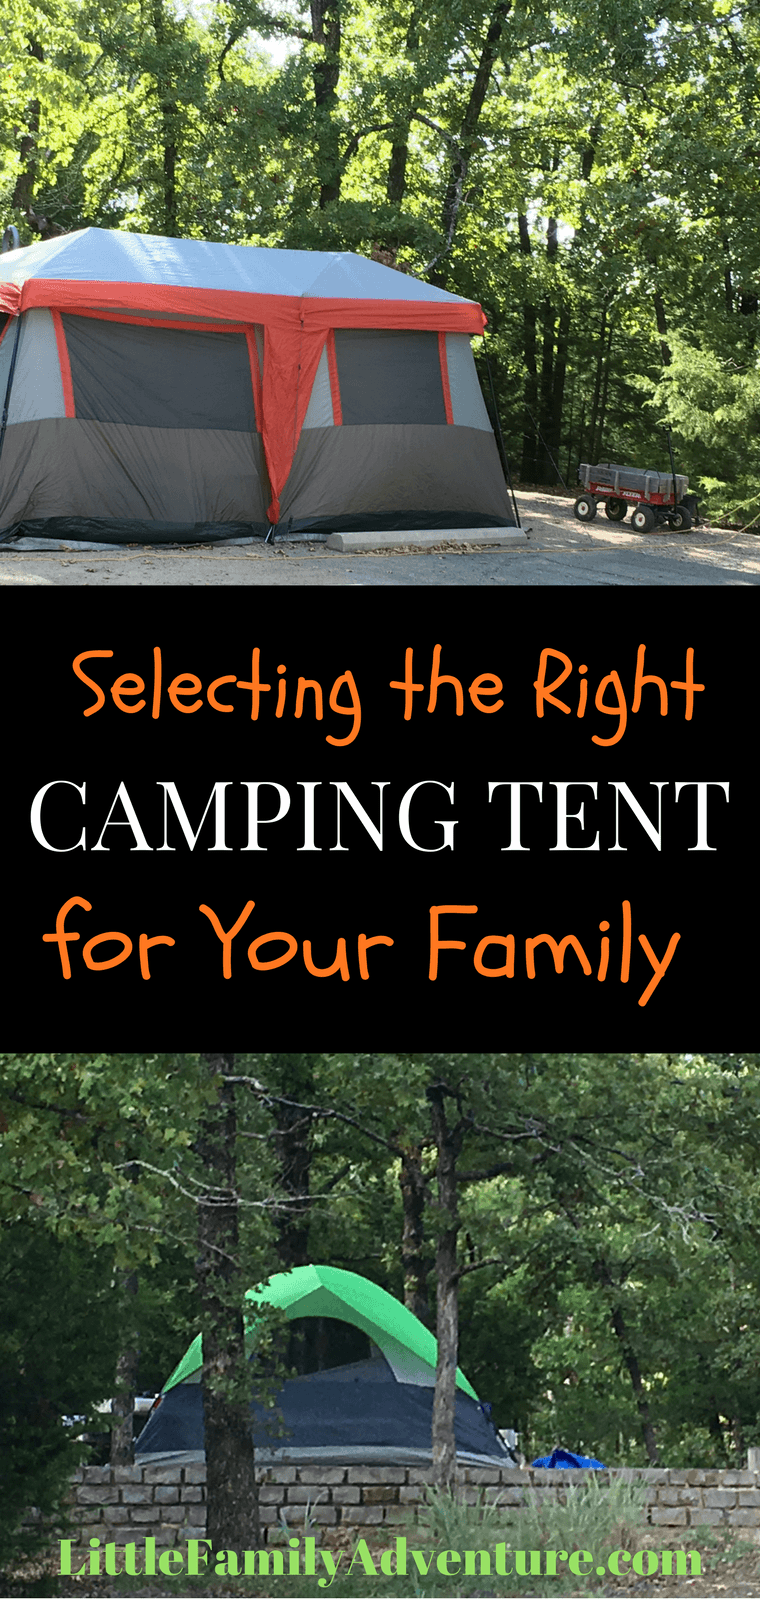 Questions to Ask When Selecting a Family Camping Tent